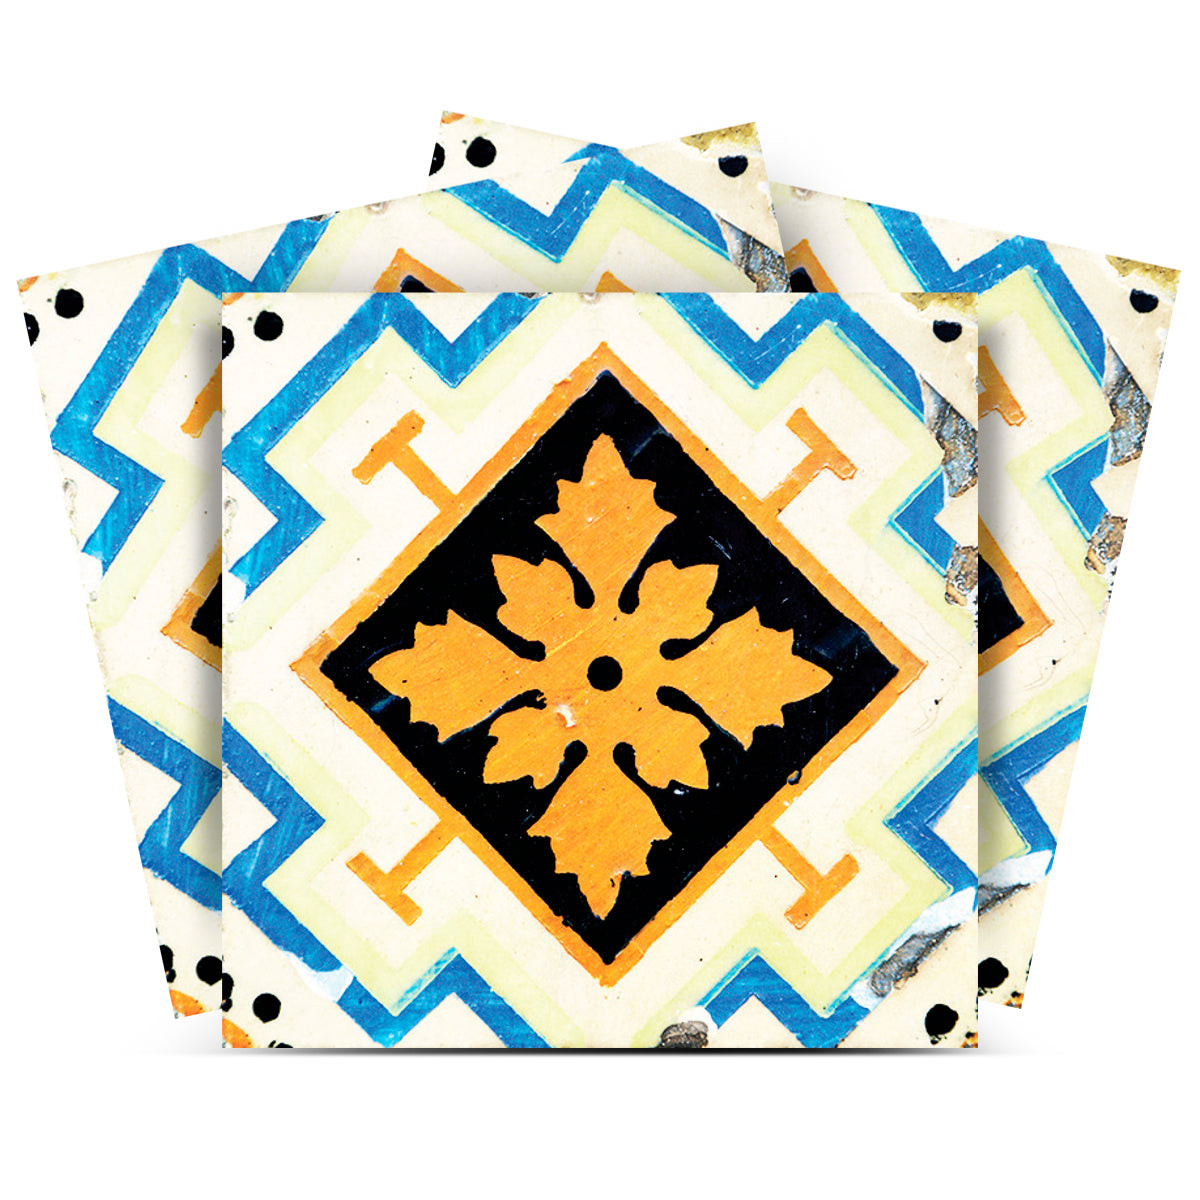 8" x 8" Gold Snowflake Peel and Stick Removable Tiles-400488-1